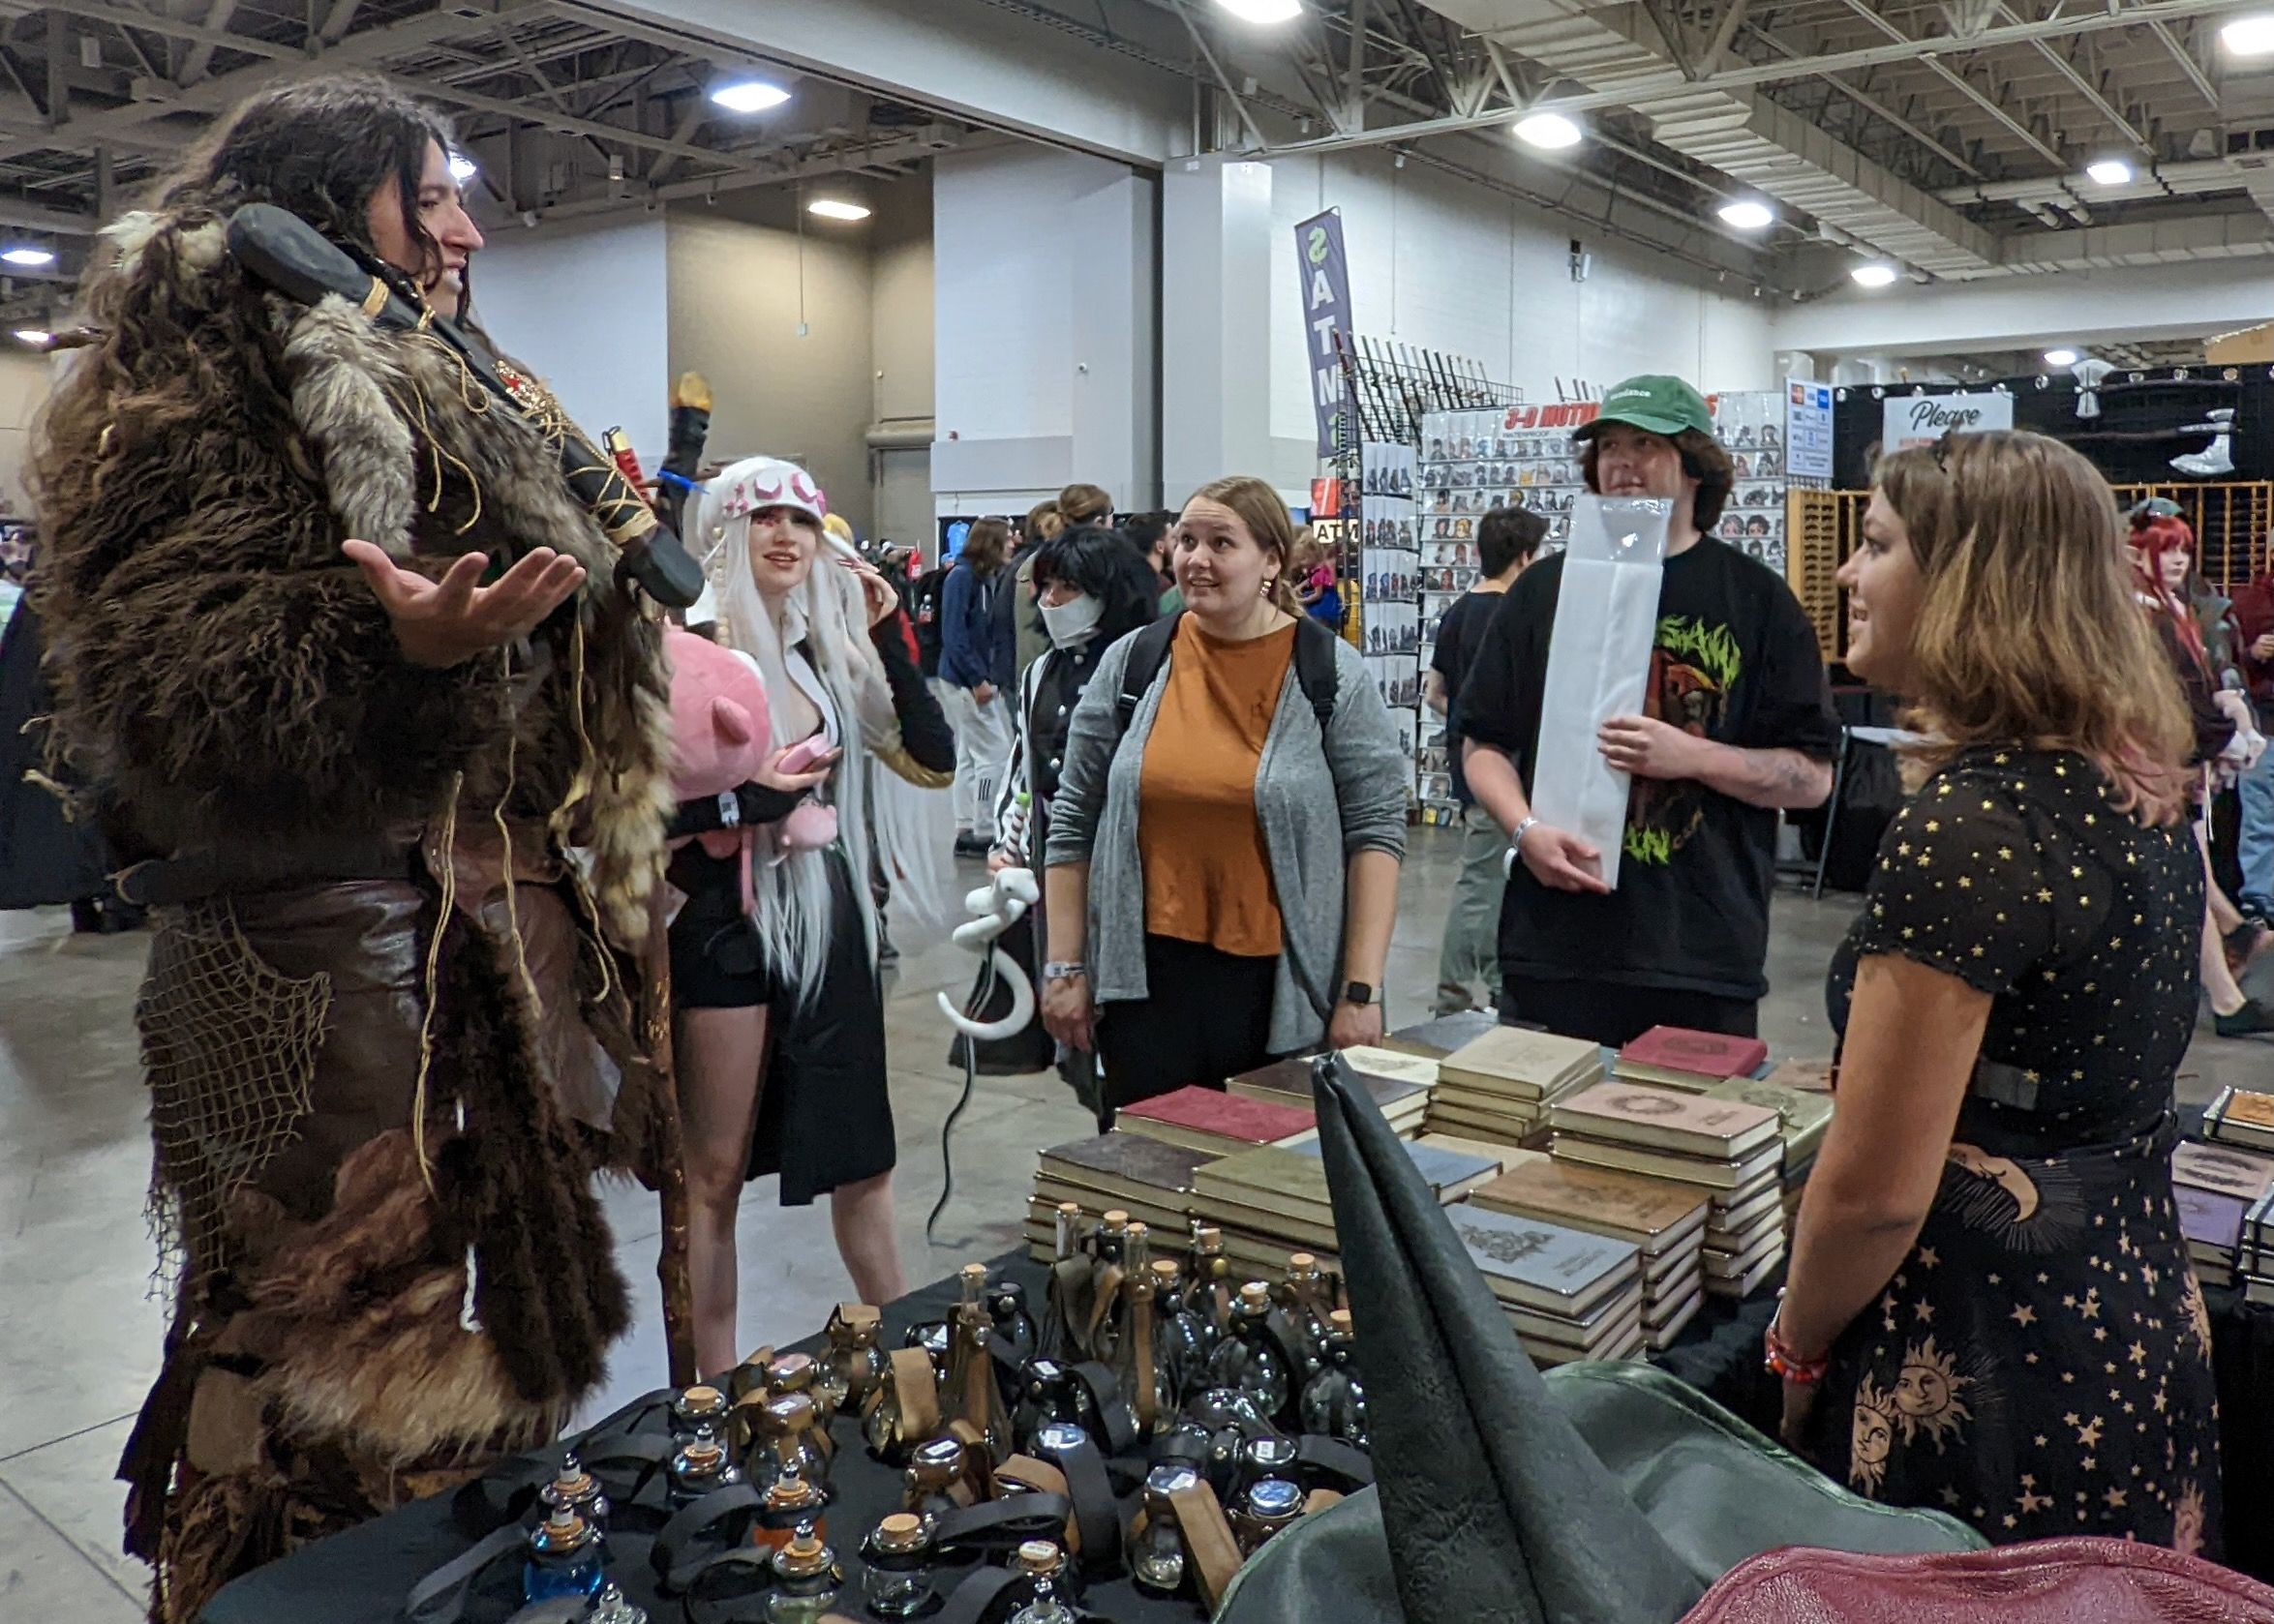 A group of people admire a man's costume of furs at a fan convention.